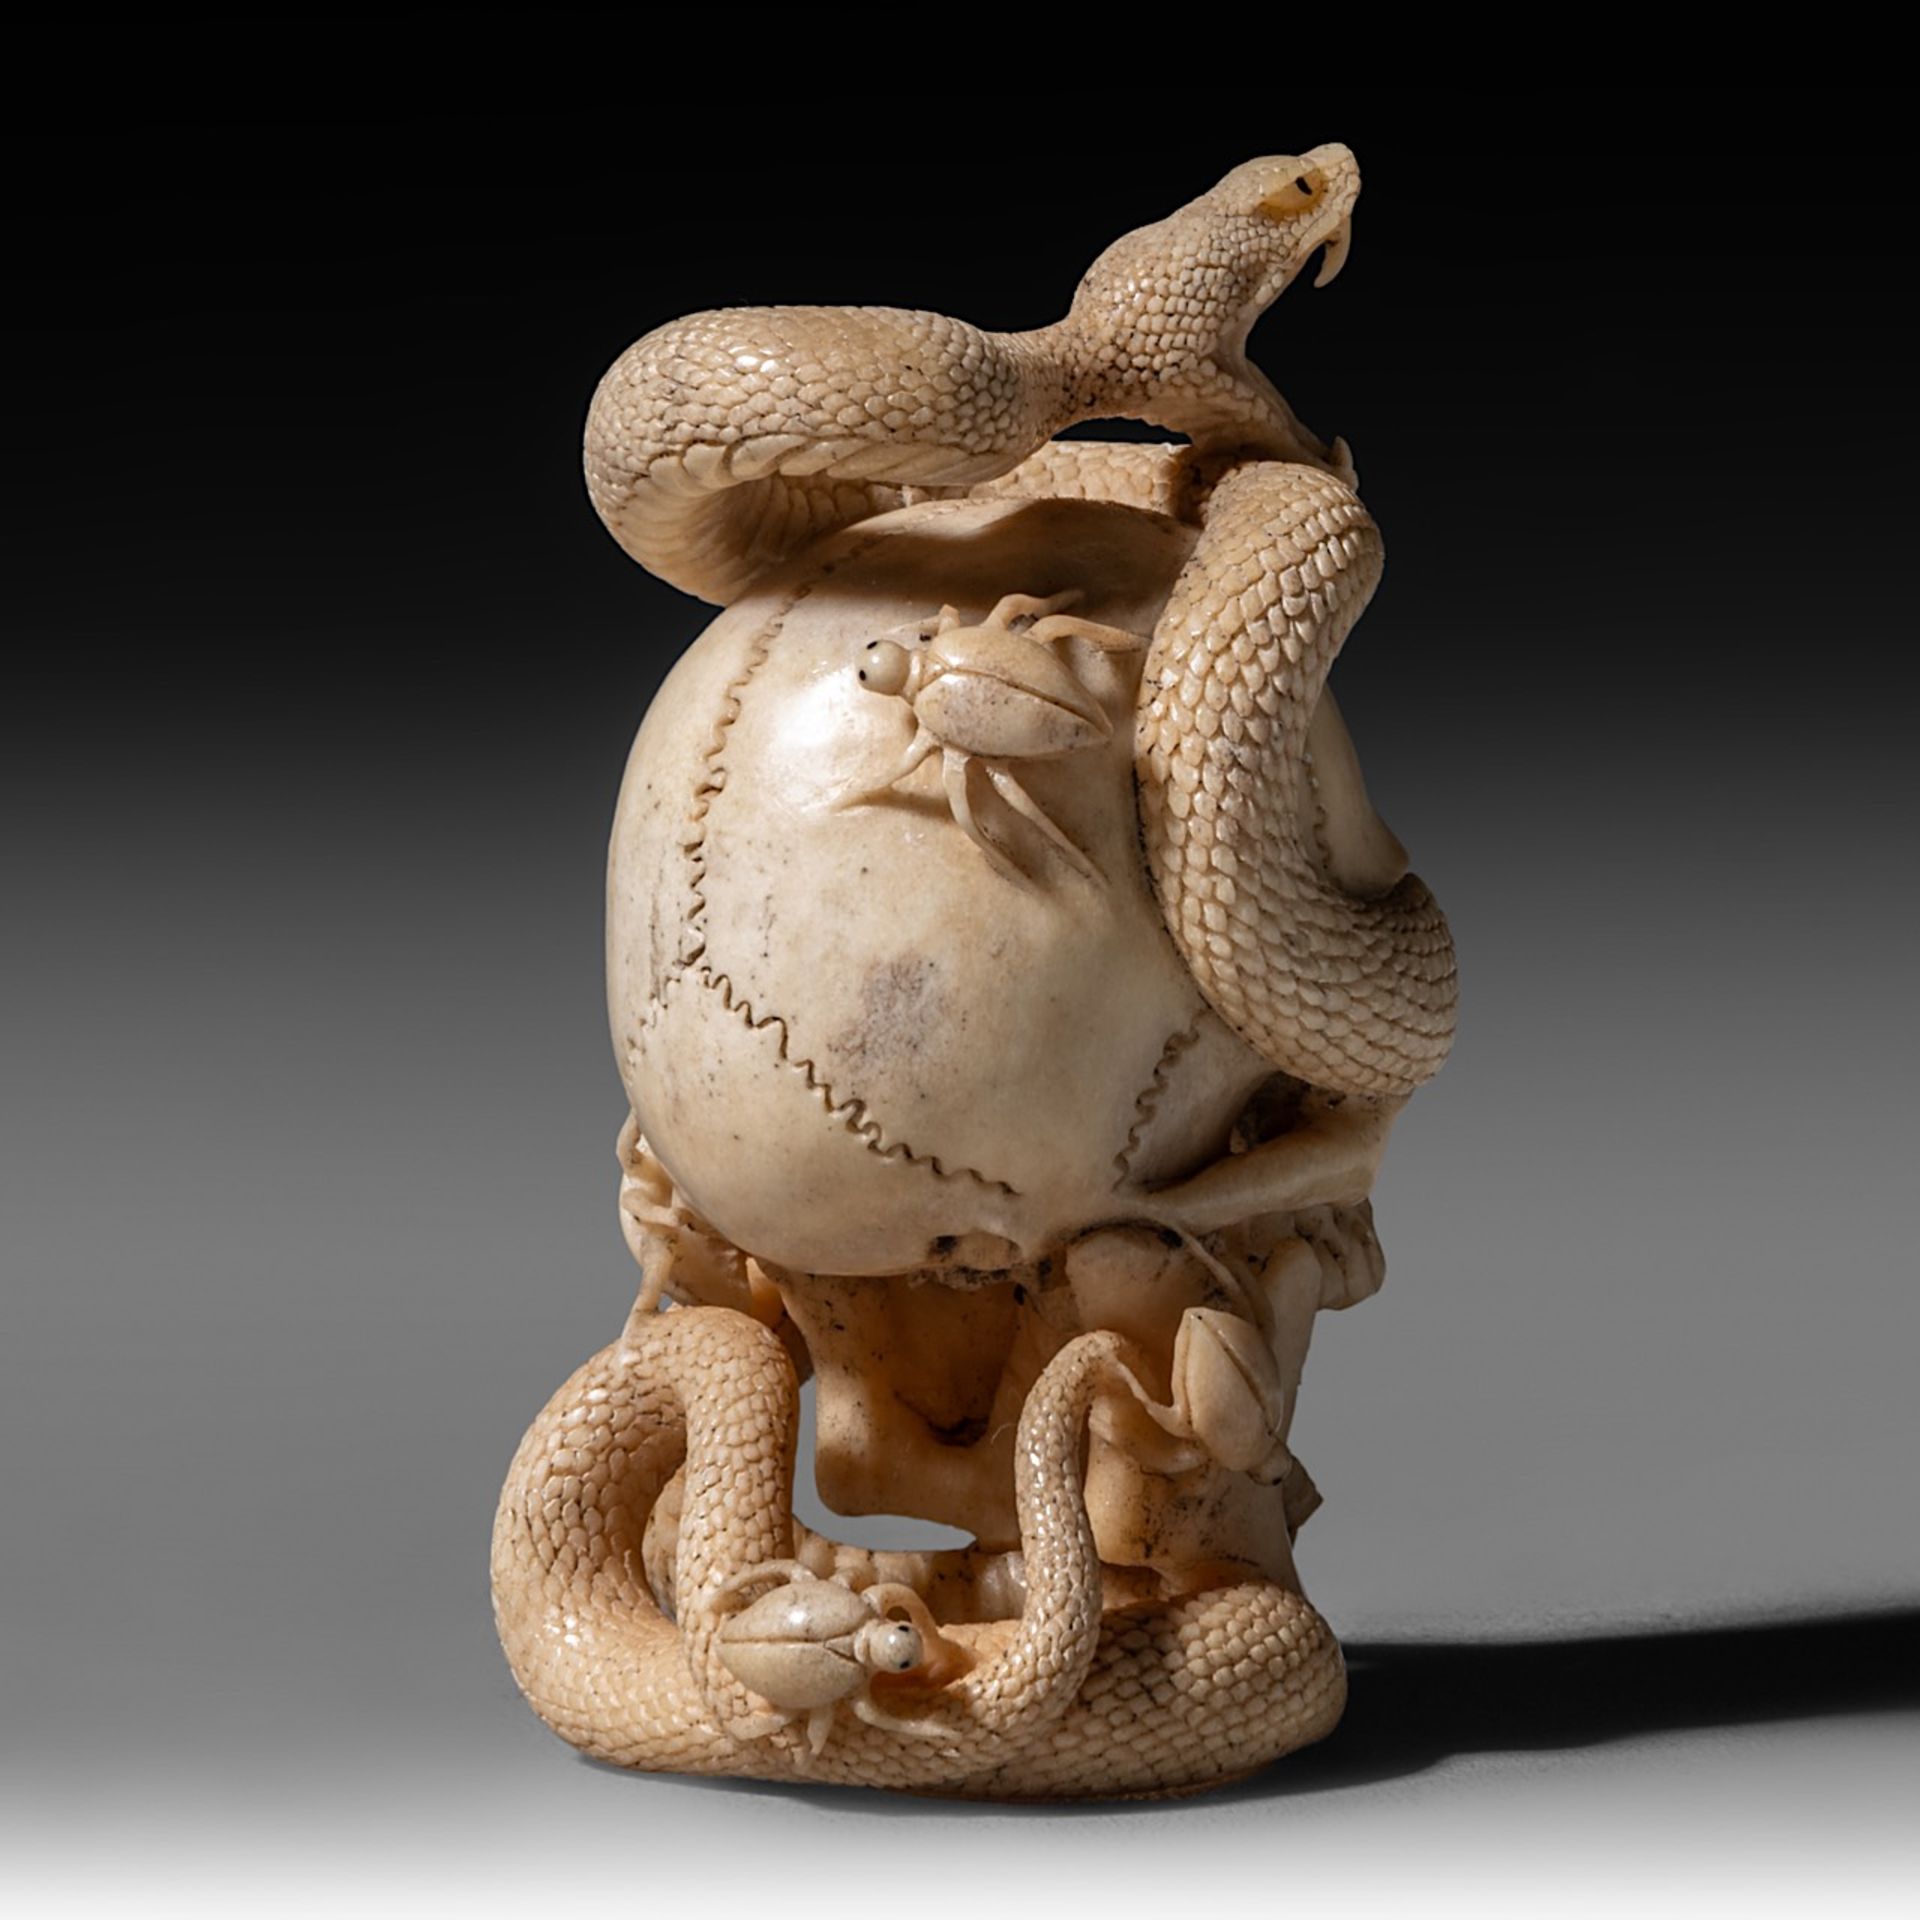 A (German) skull and snake sculpture, bone, 18th - 19th century, H 7,9 cm - weight 79 g - Image 6 of 9